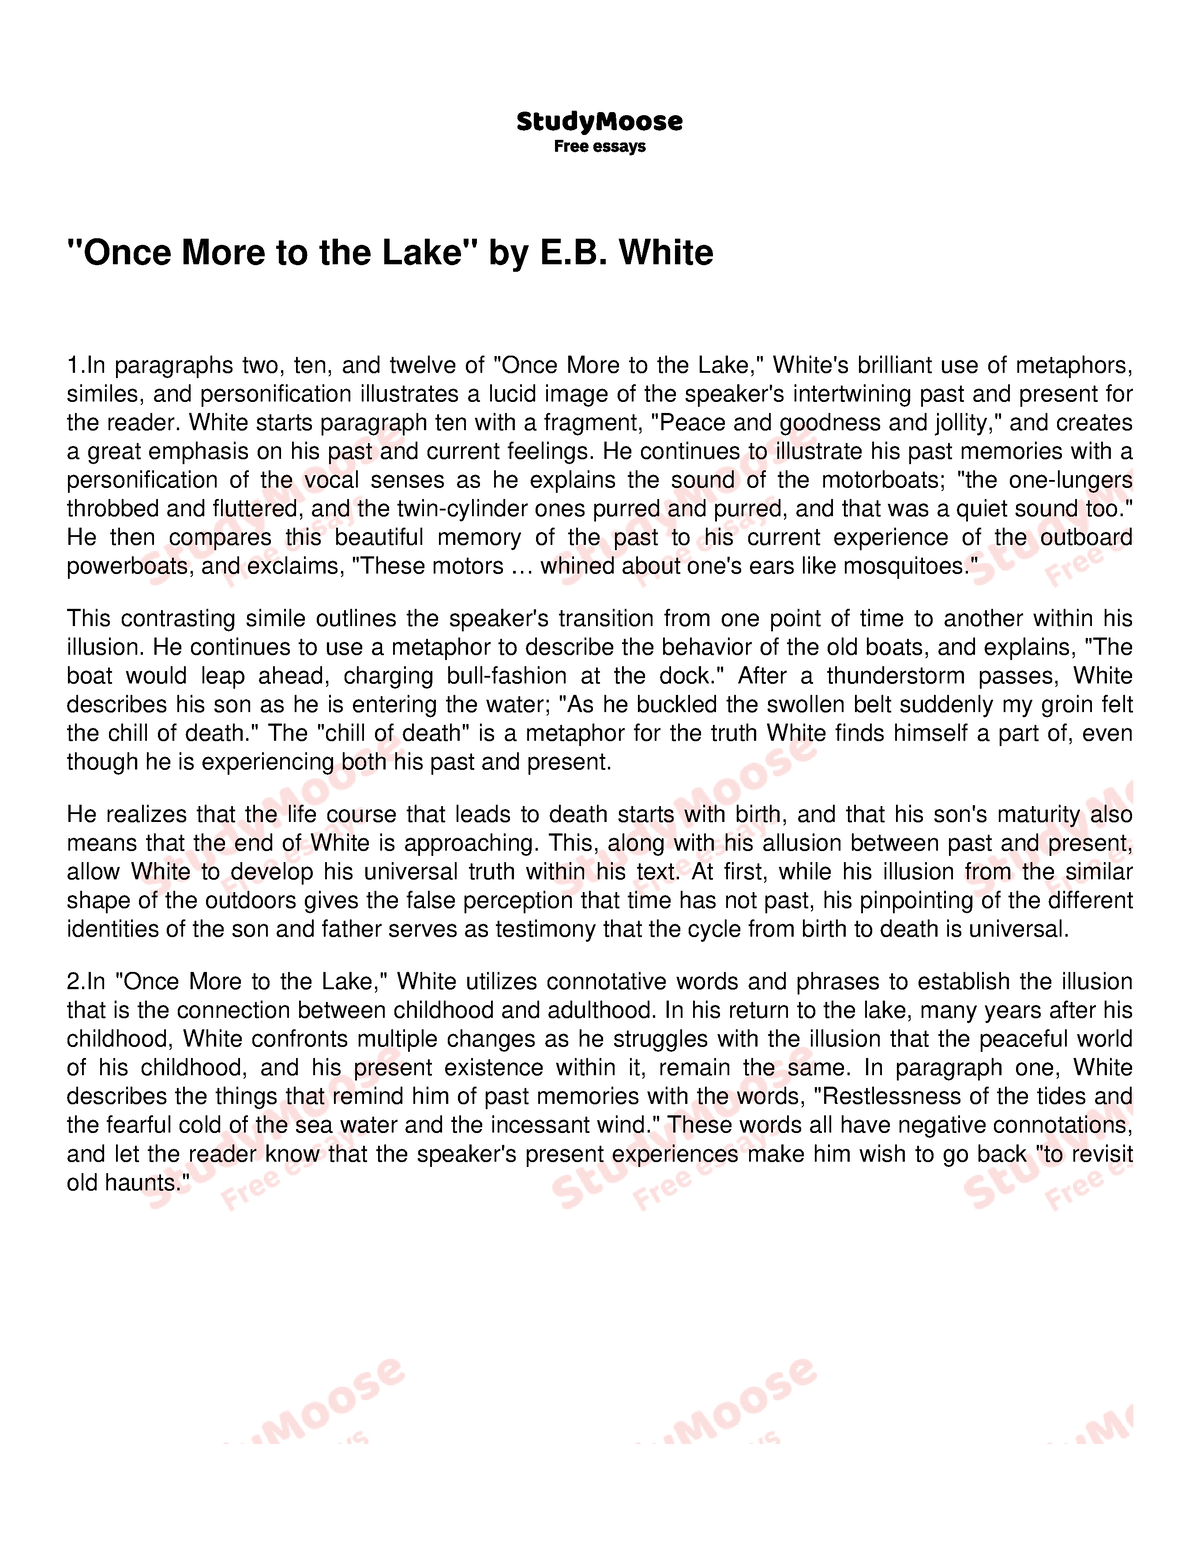 once more to the lake eb white essay